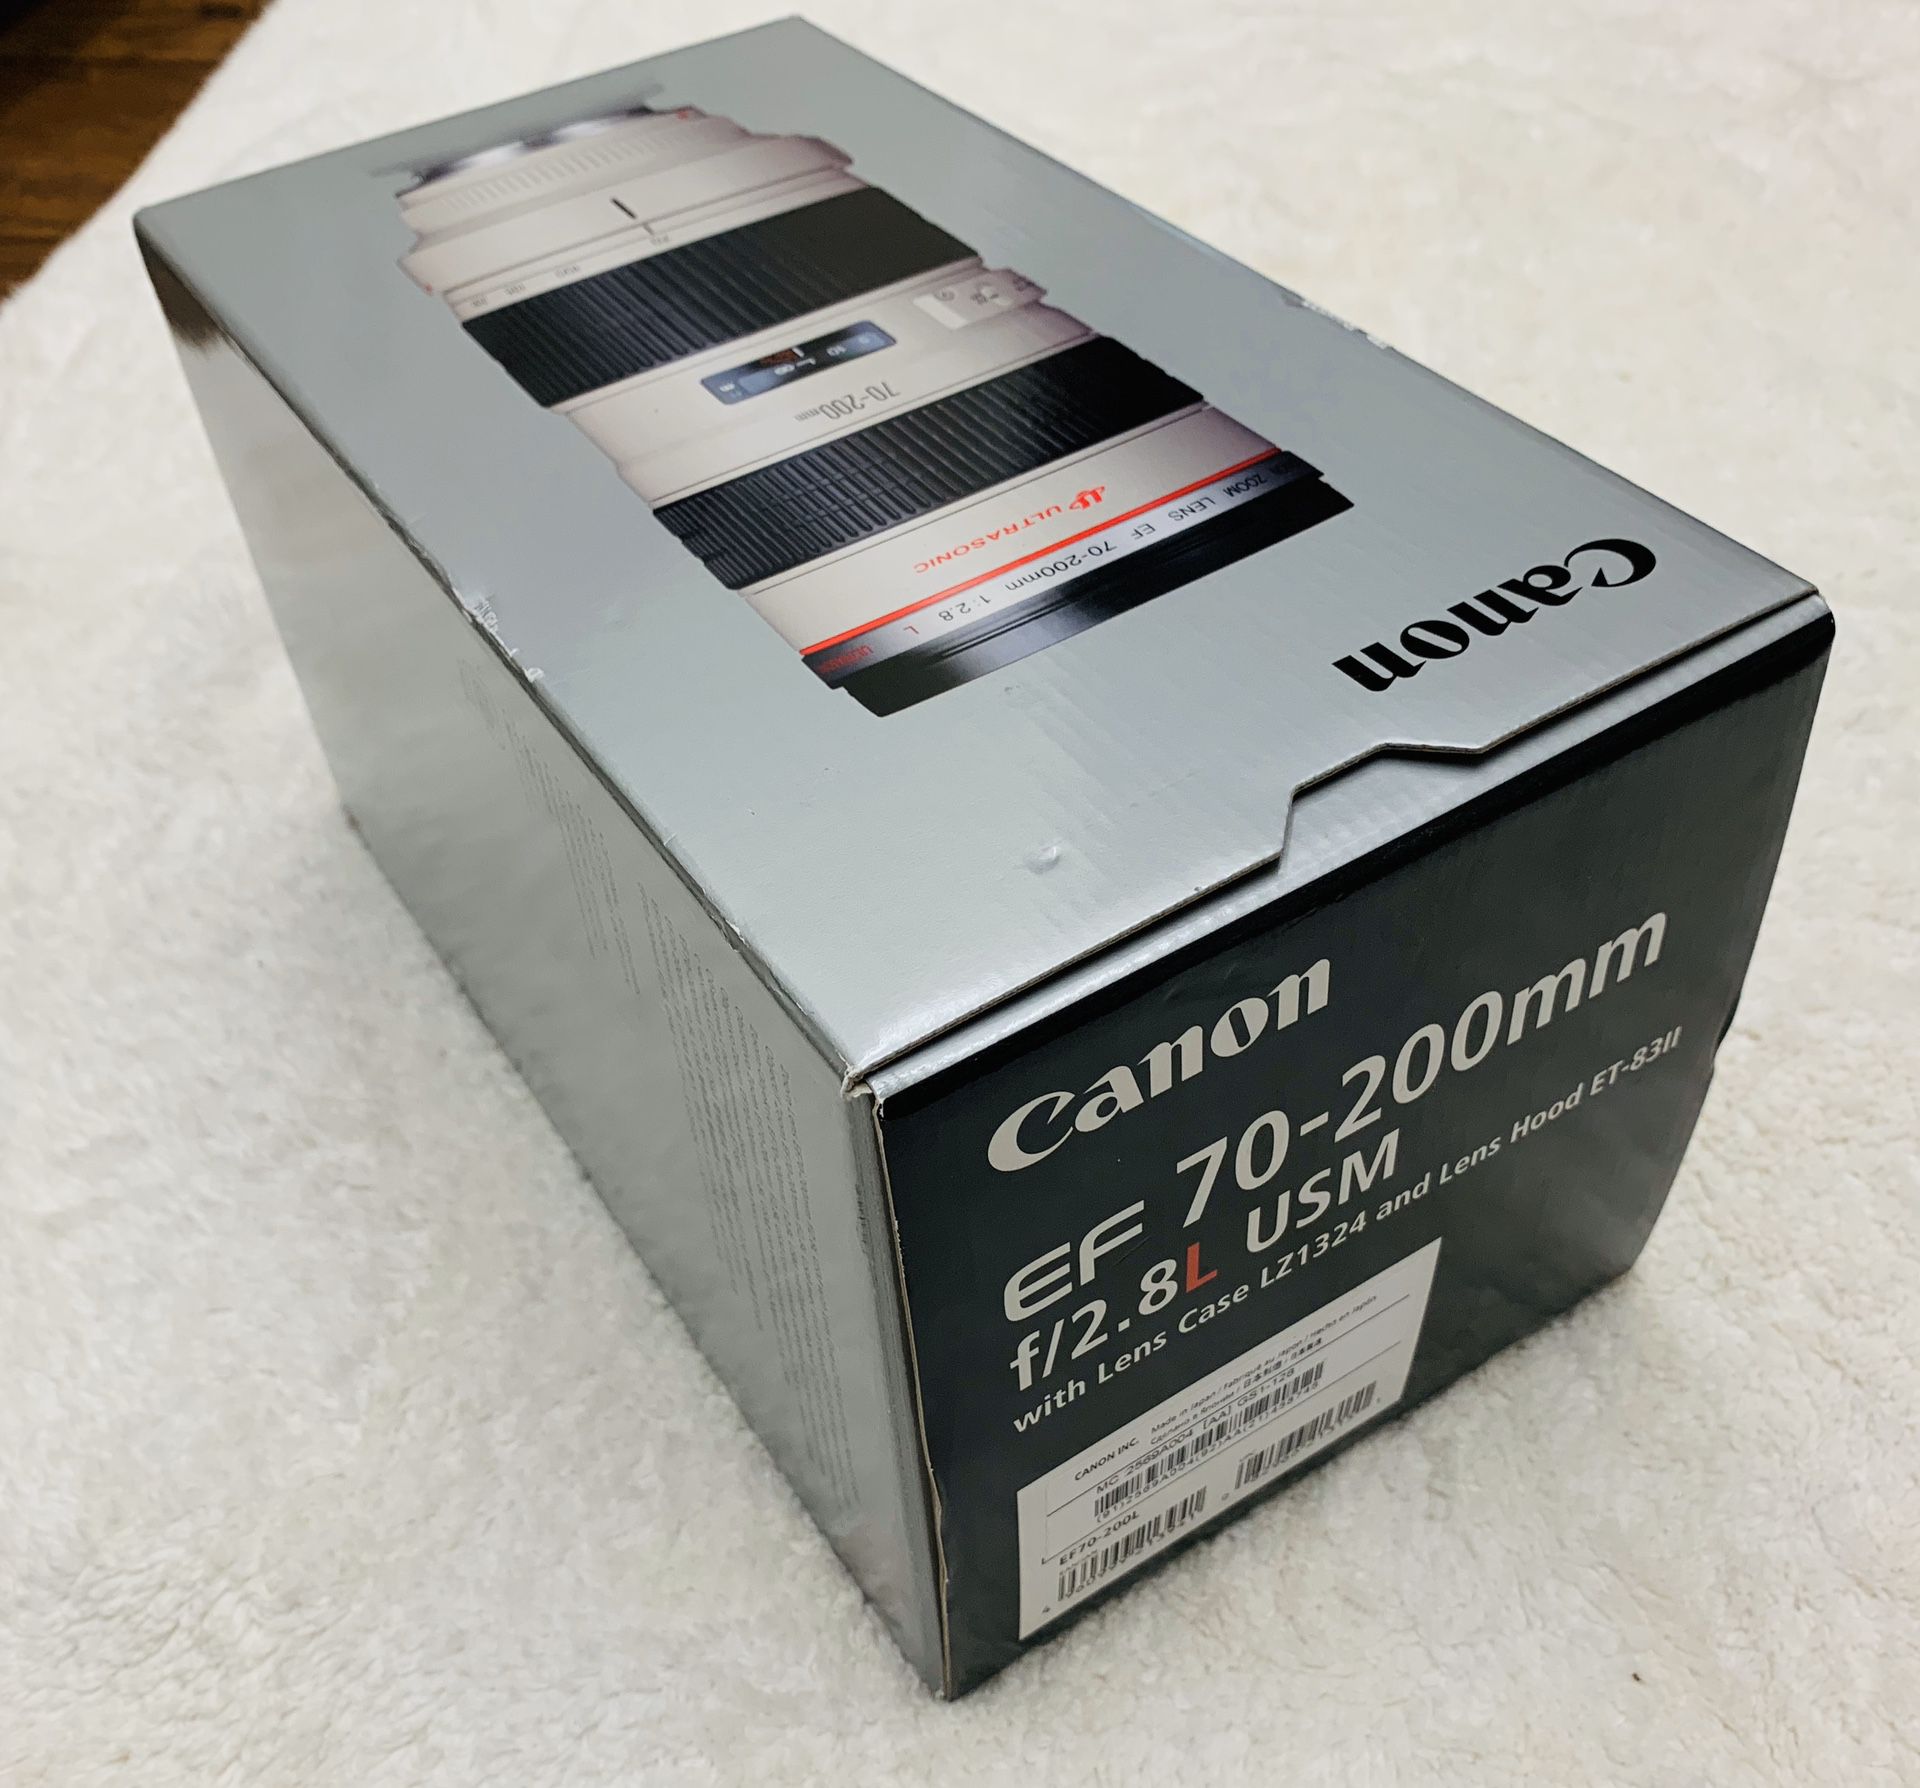 NEW Canon EF 70-200mm f/2.8 L USM Lens USA Model Sealed in Box FIRM PRICE